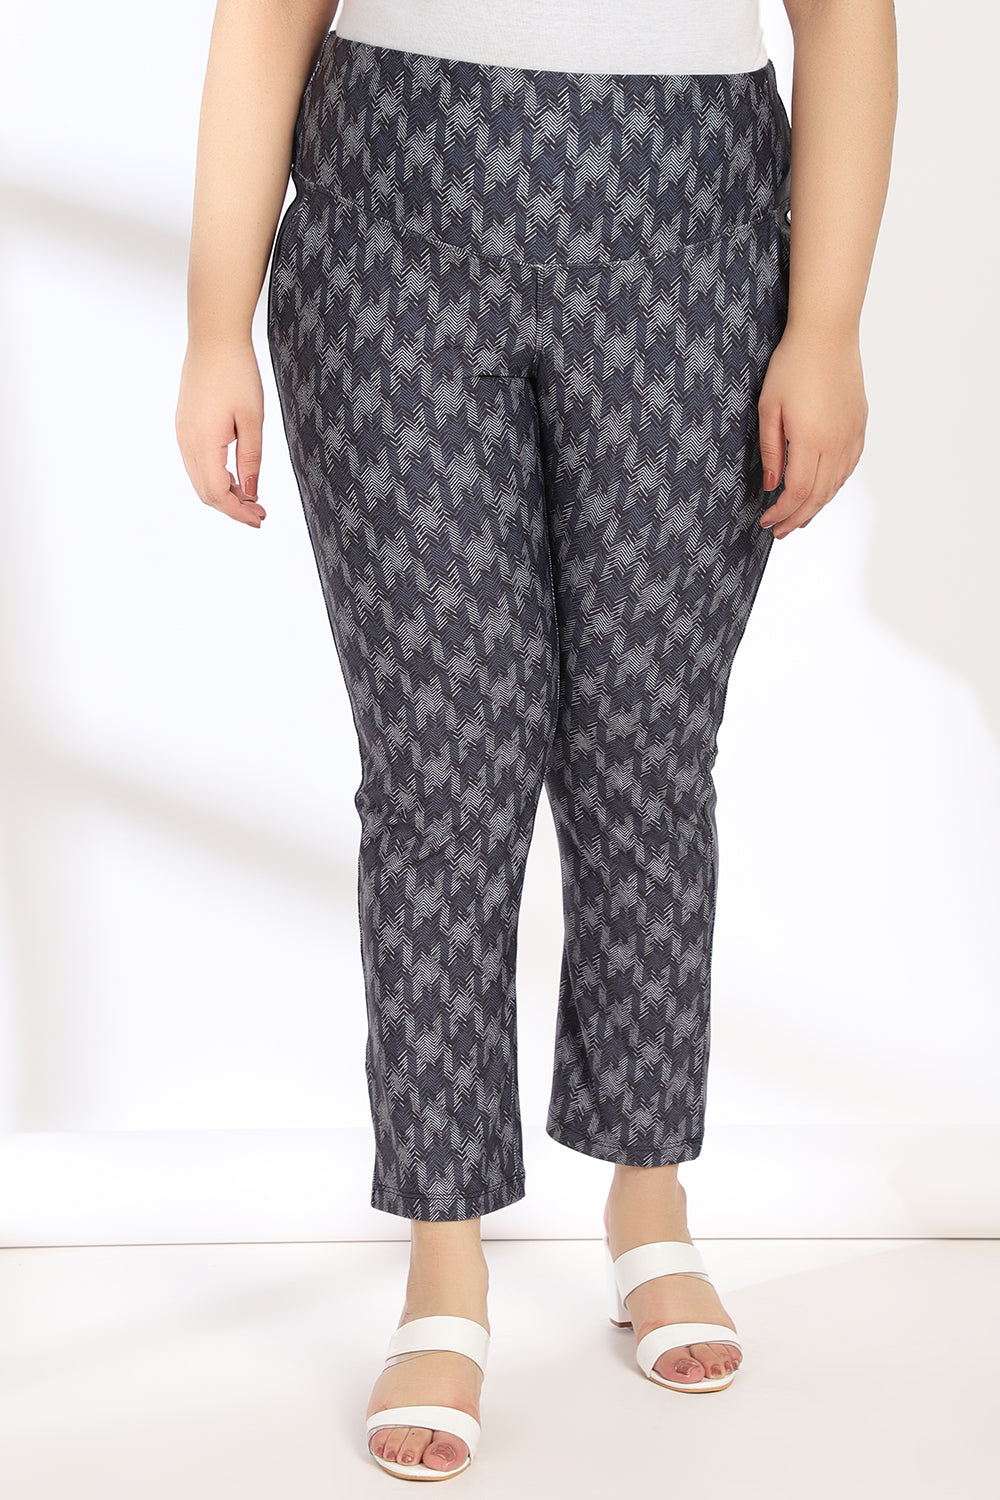 Plus Size Blue White Houndstooth Tummy Shaper Printed Pants